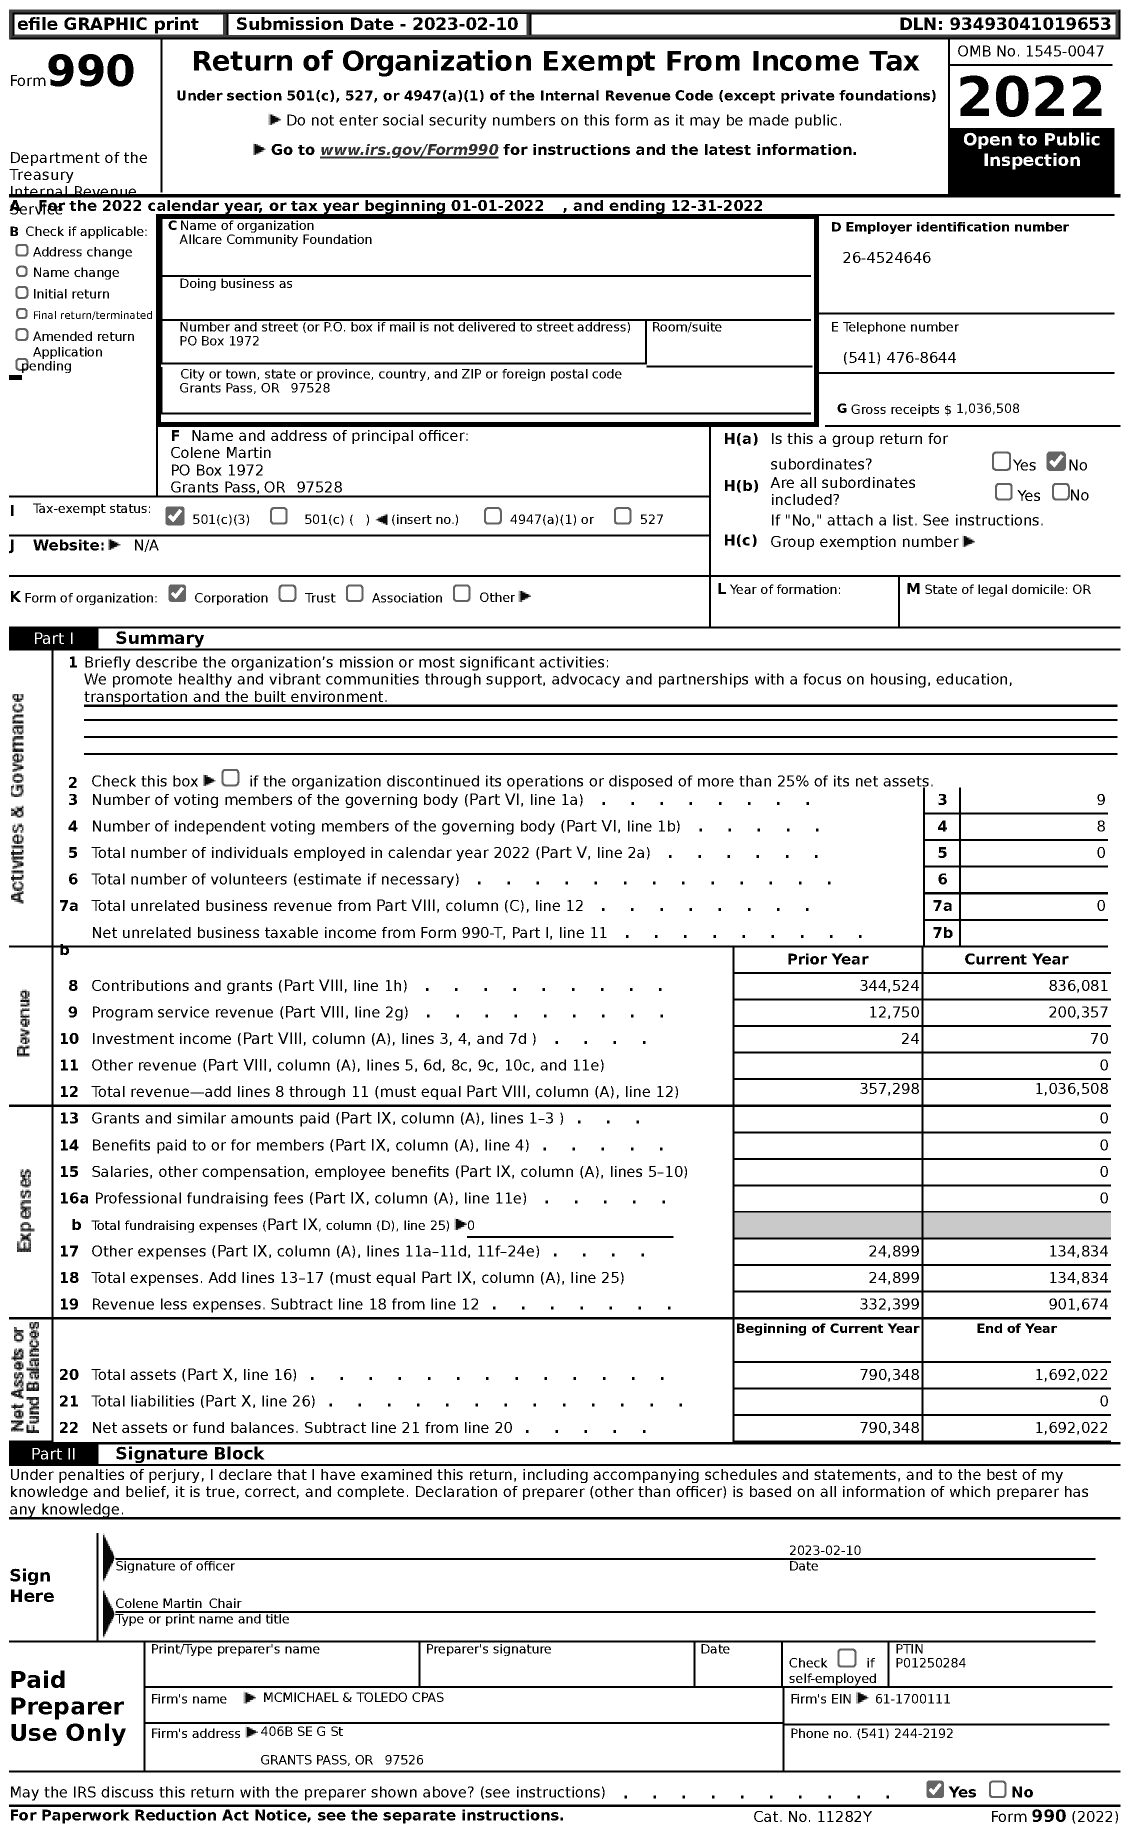 Image of first page of 2022 Form 990 for Allcare Community Foundation